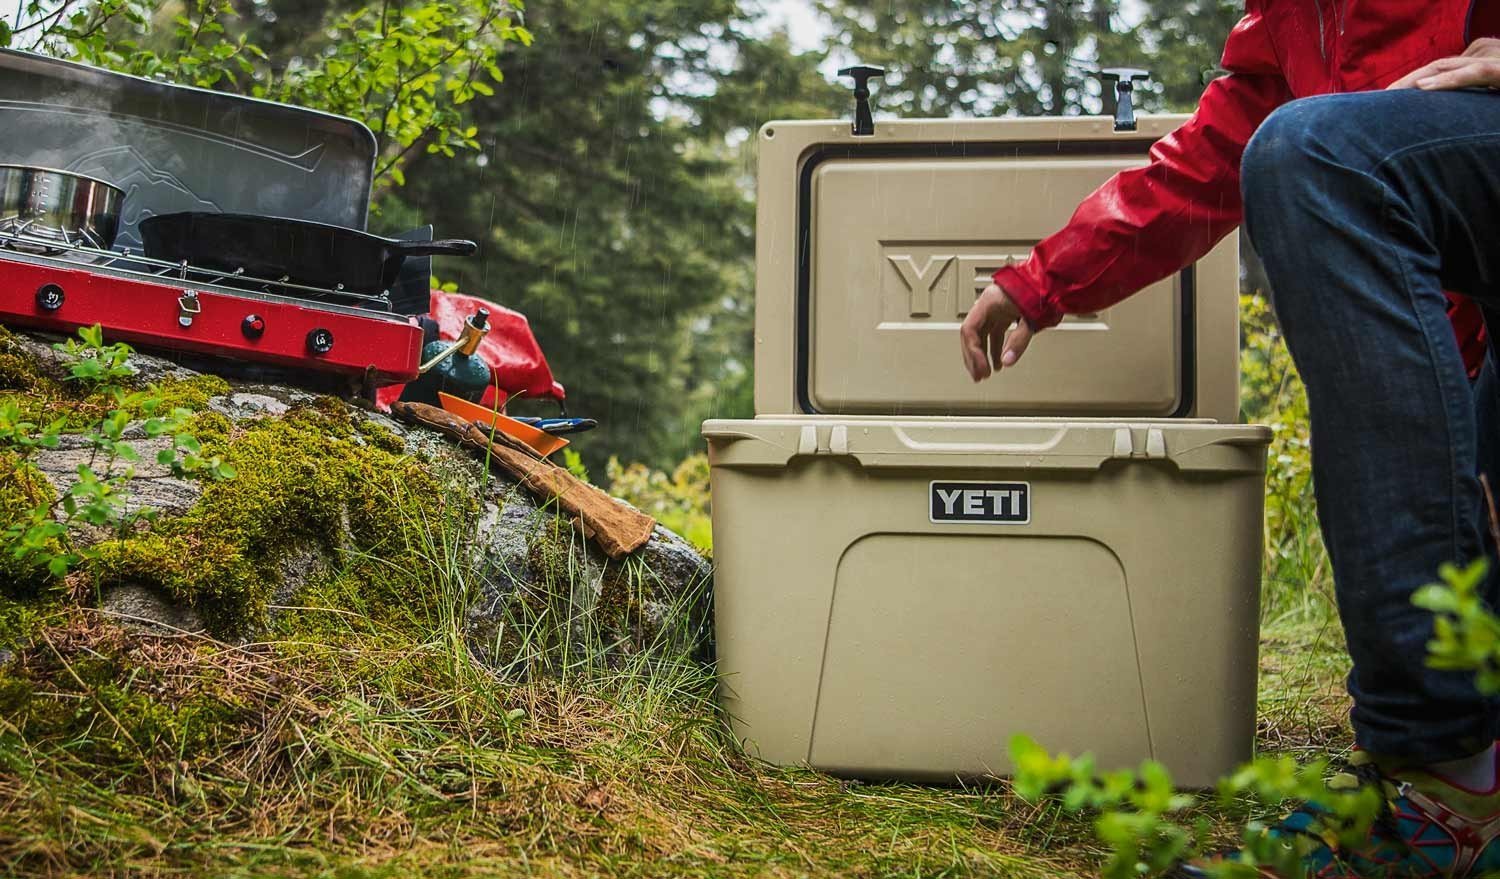 3 well known brand name coolers including Yeti, Engel and Grizzly are revie...